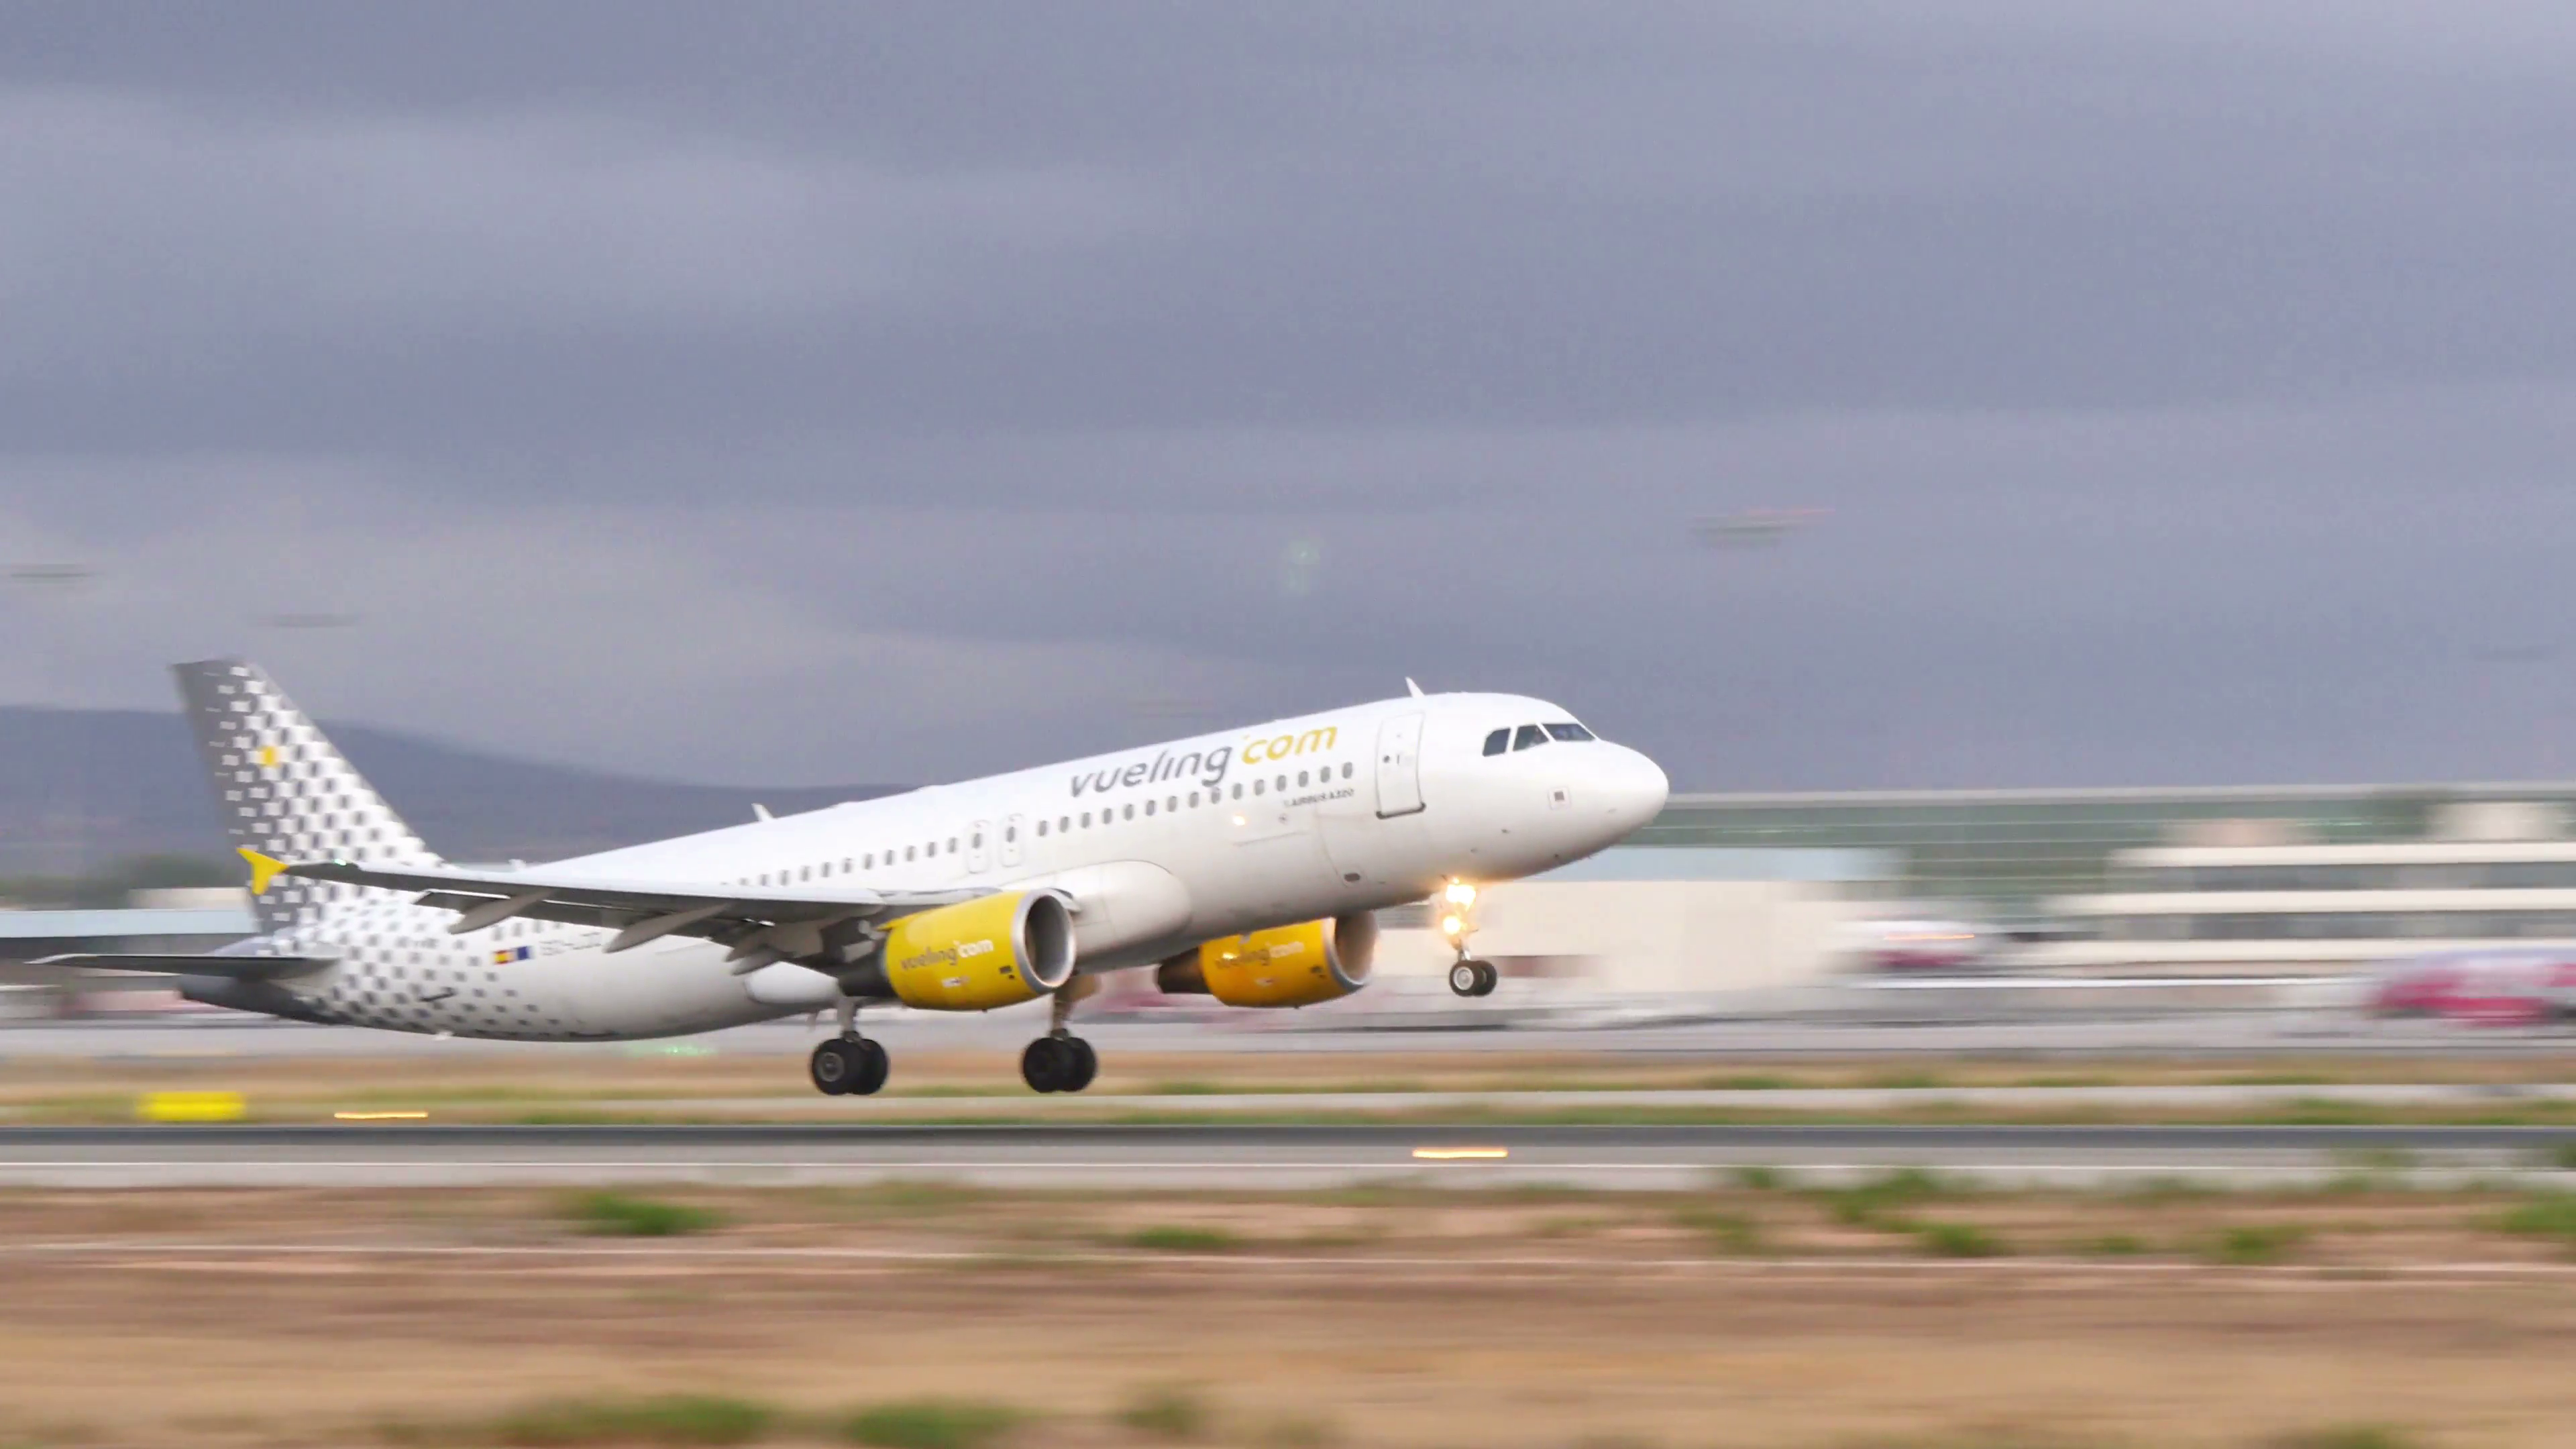 Commercial Airplane Taking Off at Majorca Airport. Passenger ...